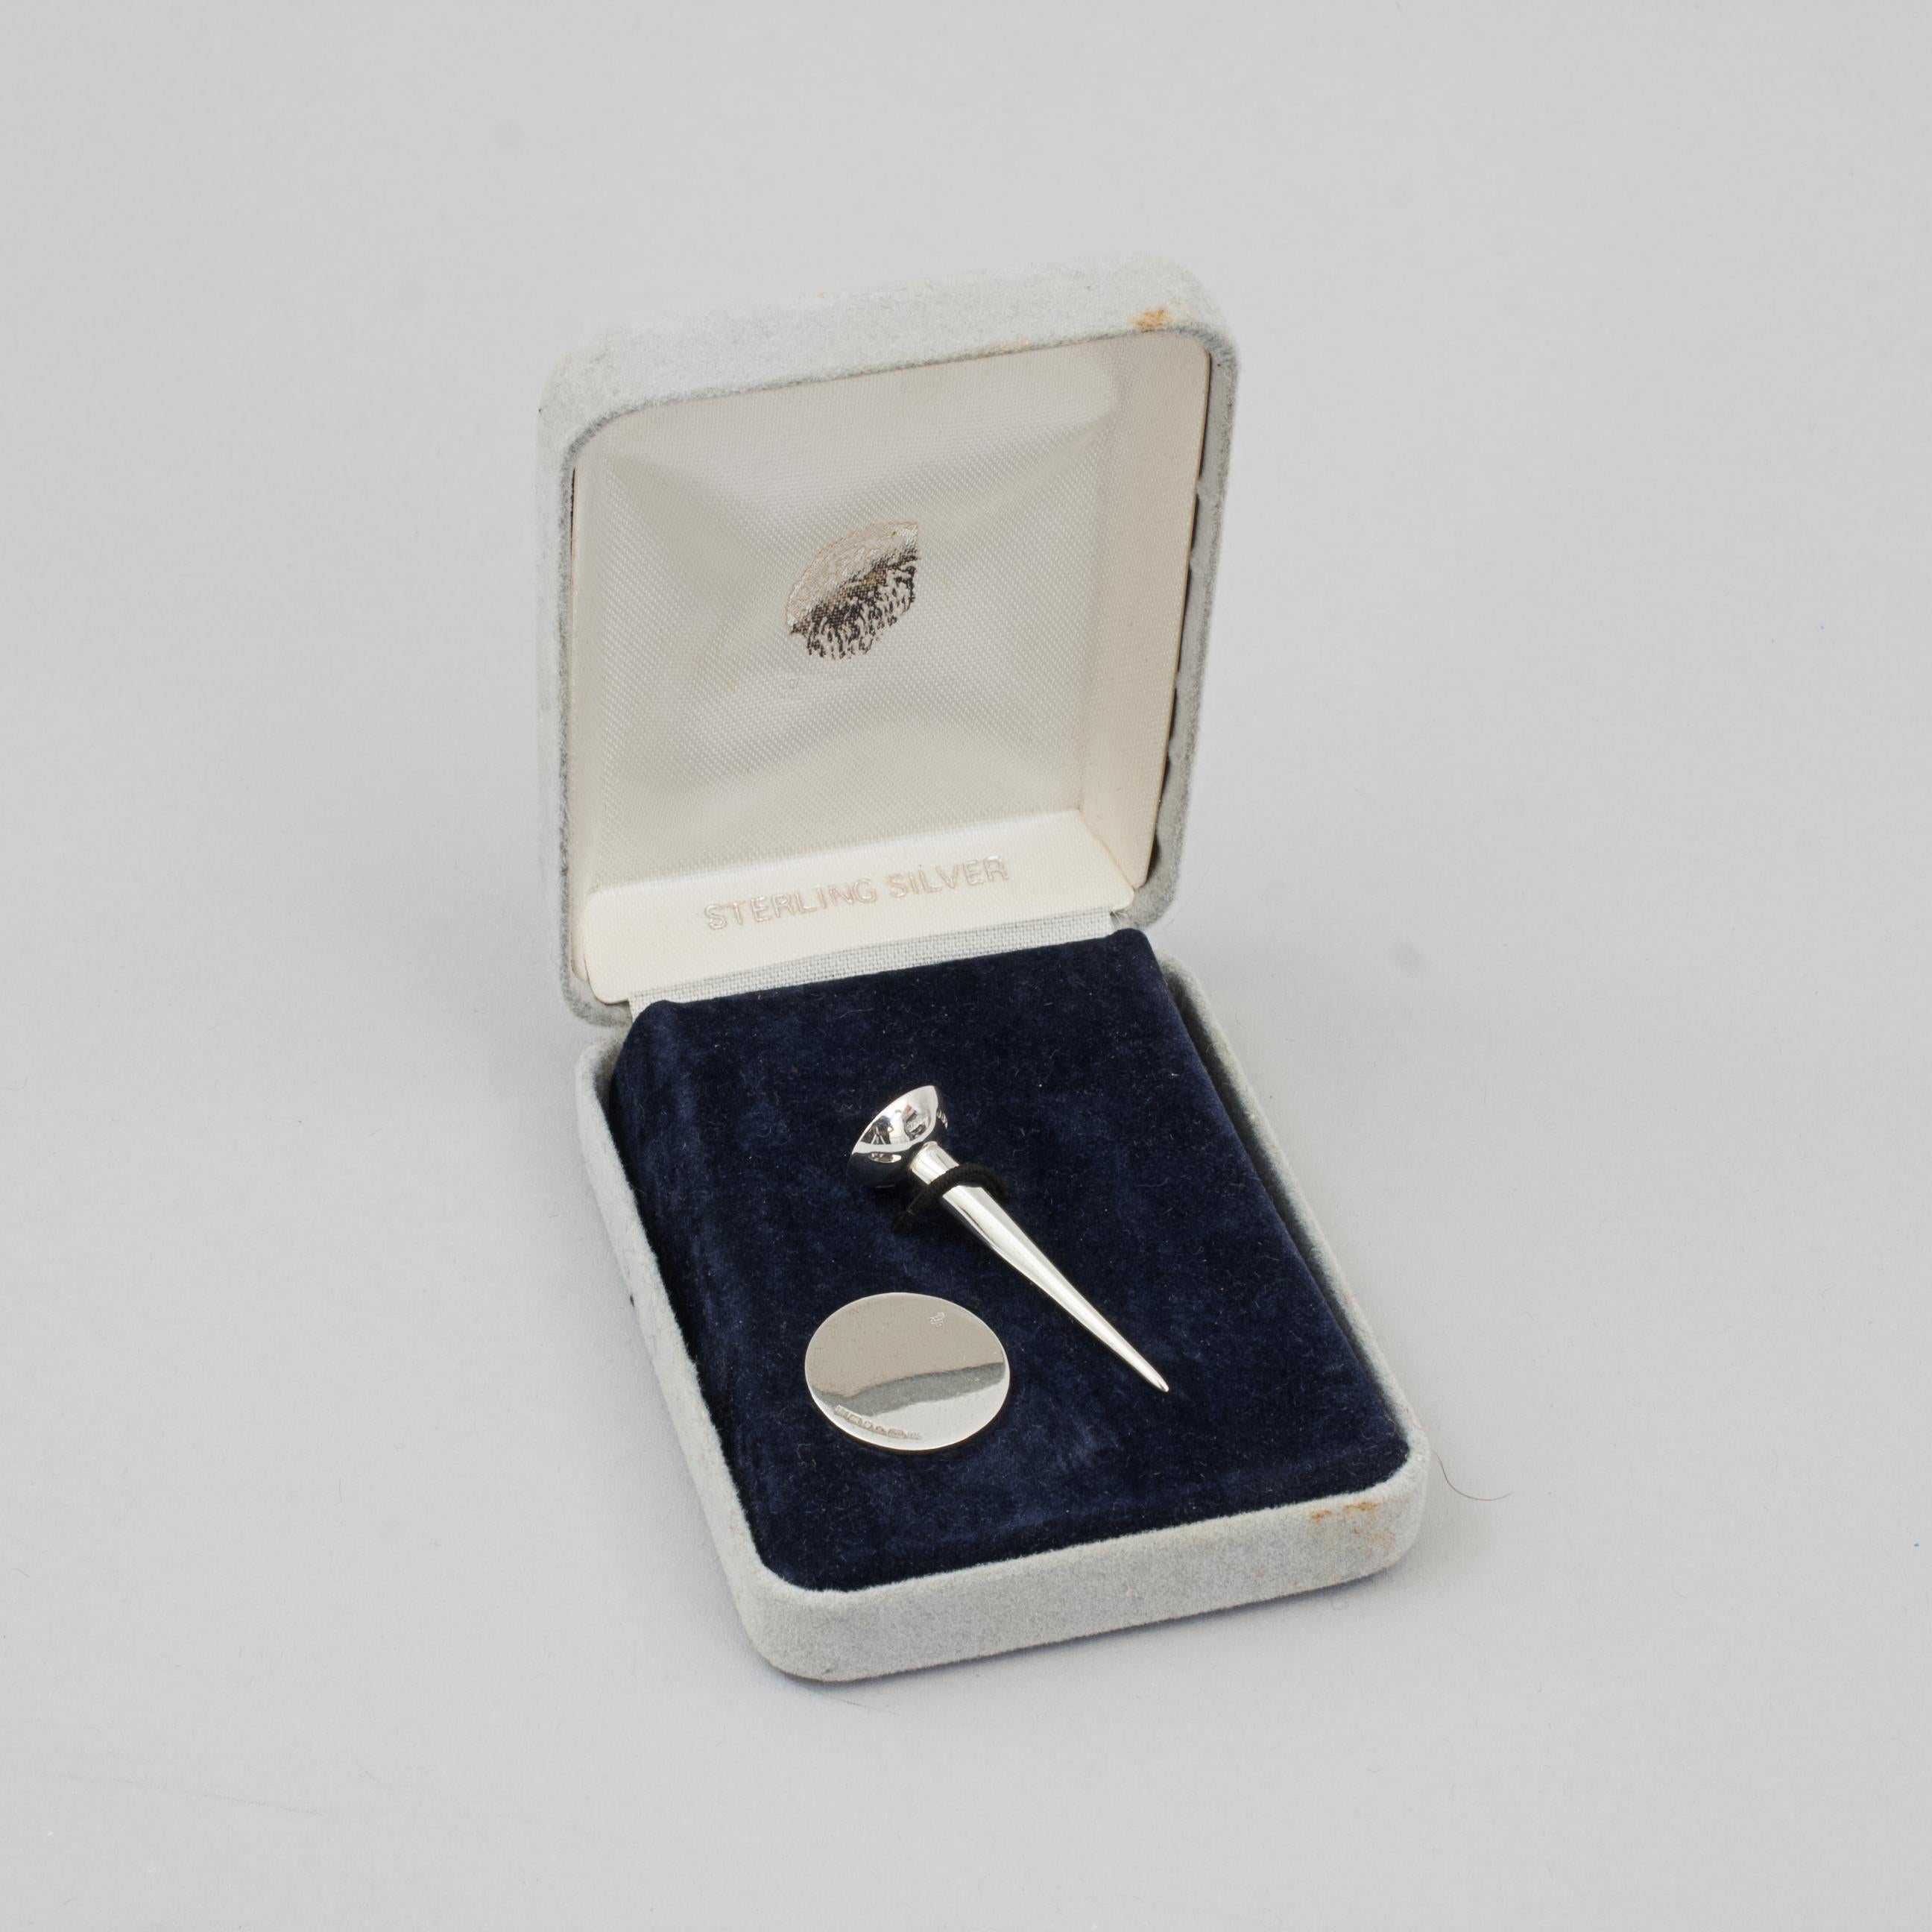 Silver Golf Ball Marker & Golf Tee Pencil.
A wonderful hallmarked sterling silver golf tee and marker set, great for the lover of golf. The two items hallmarked London 1970 with makers mark 'AN in a shield', possibly Ari D Norman. The set is in